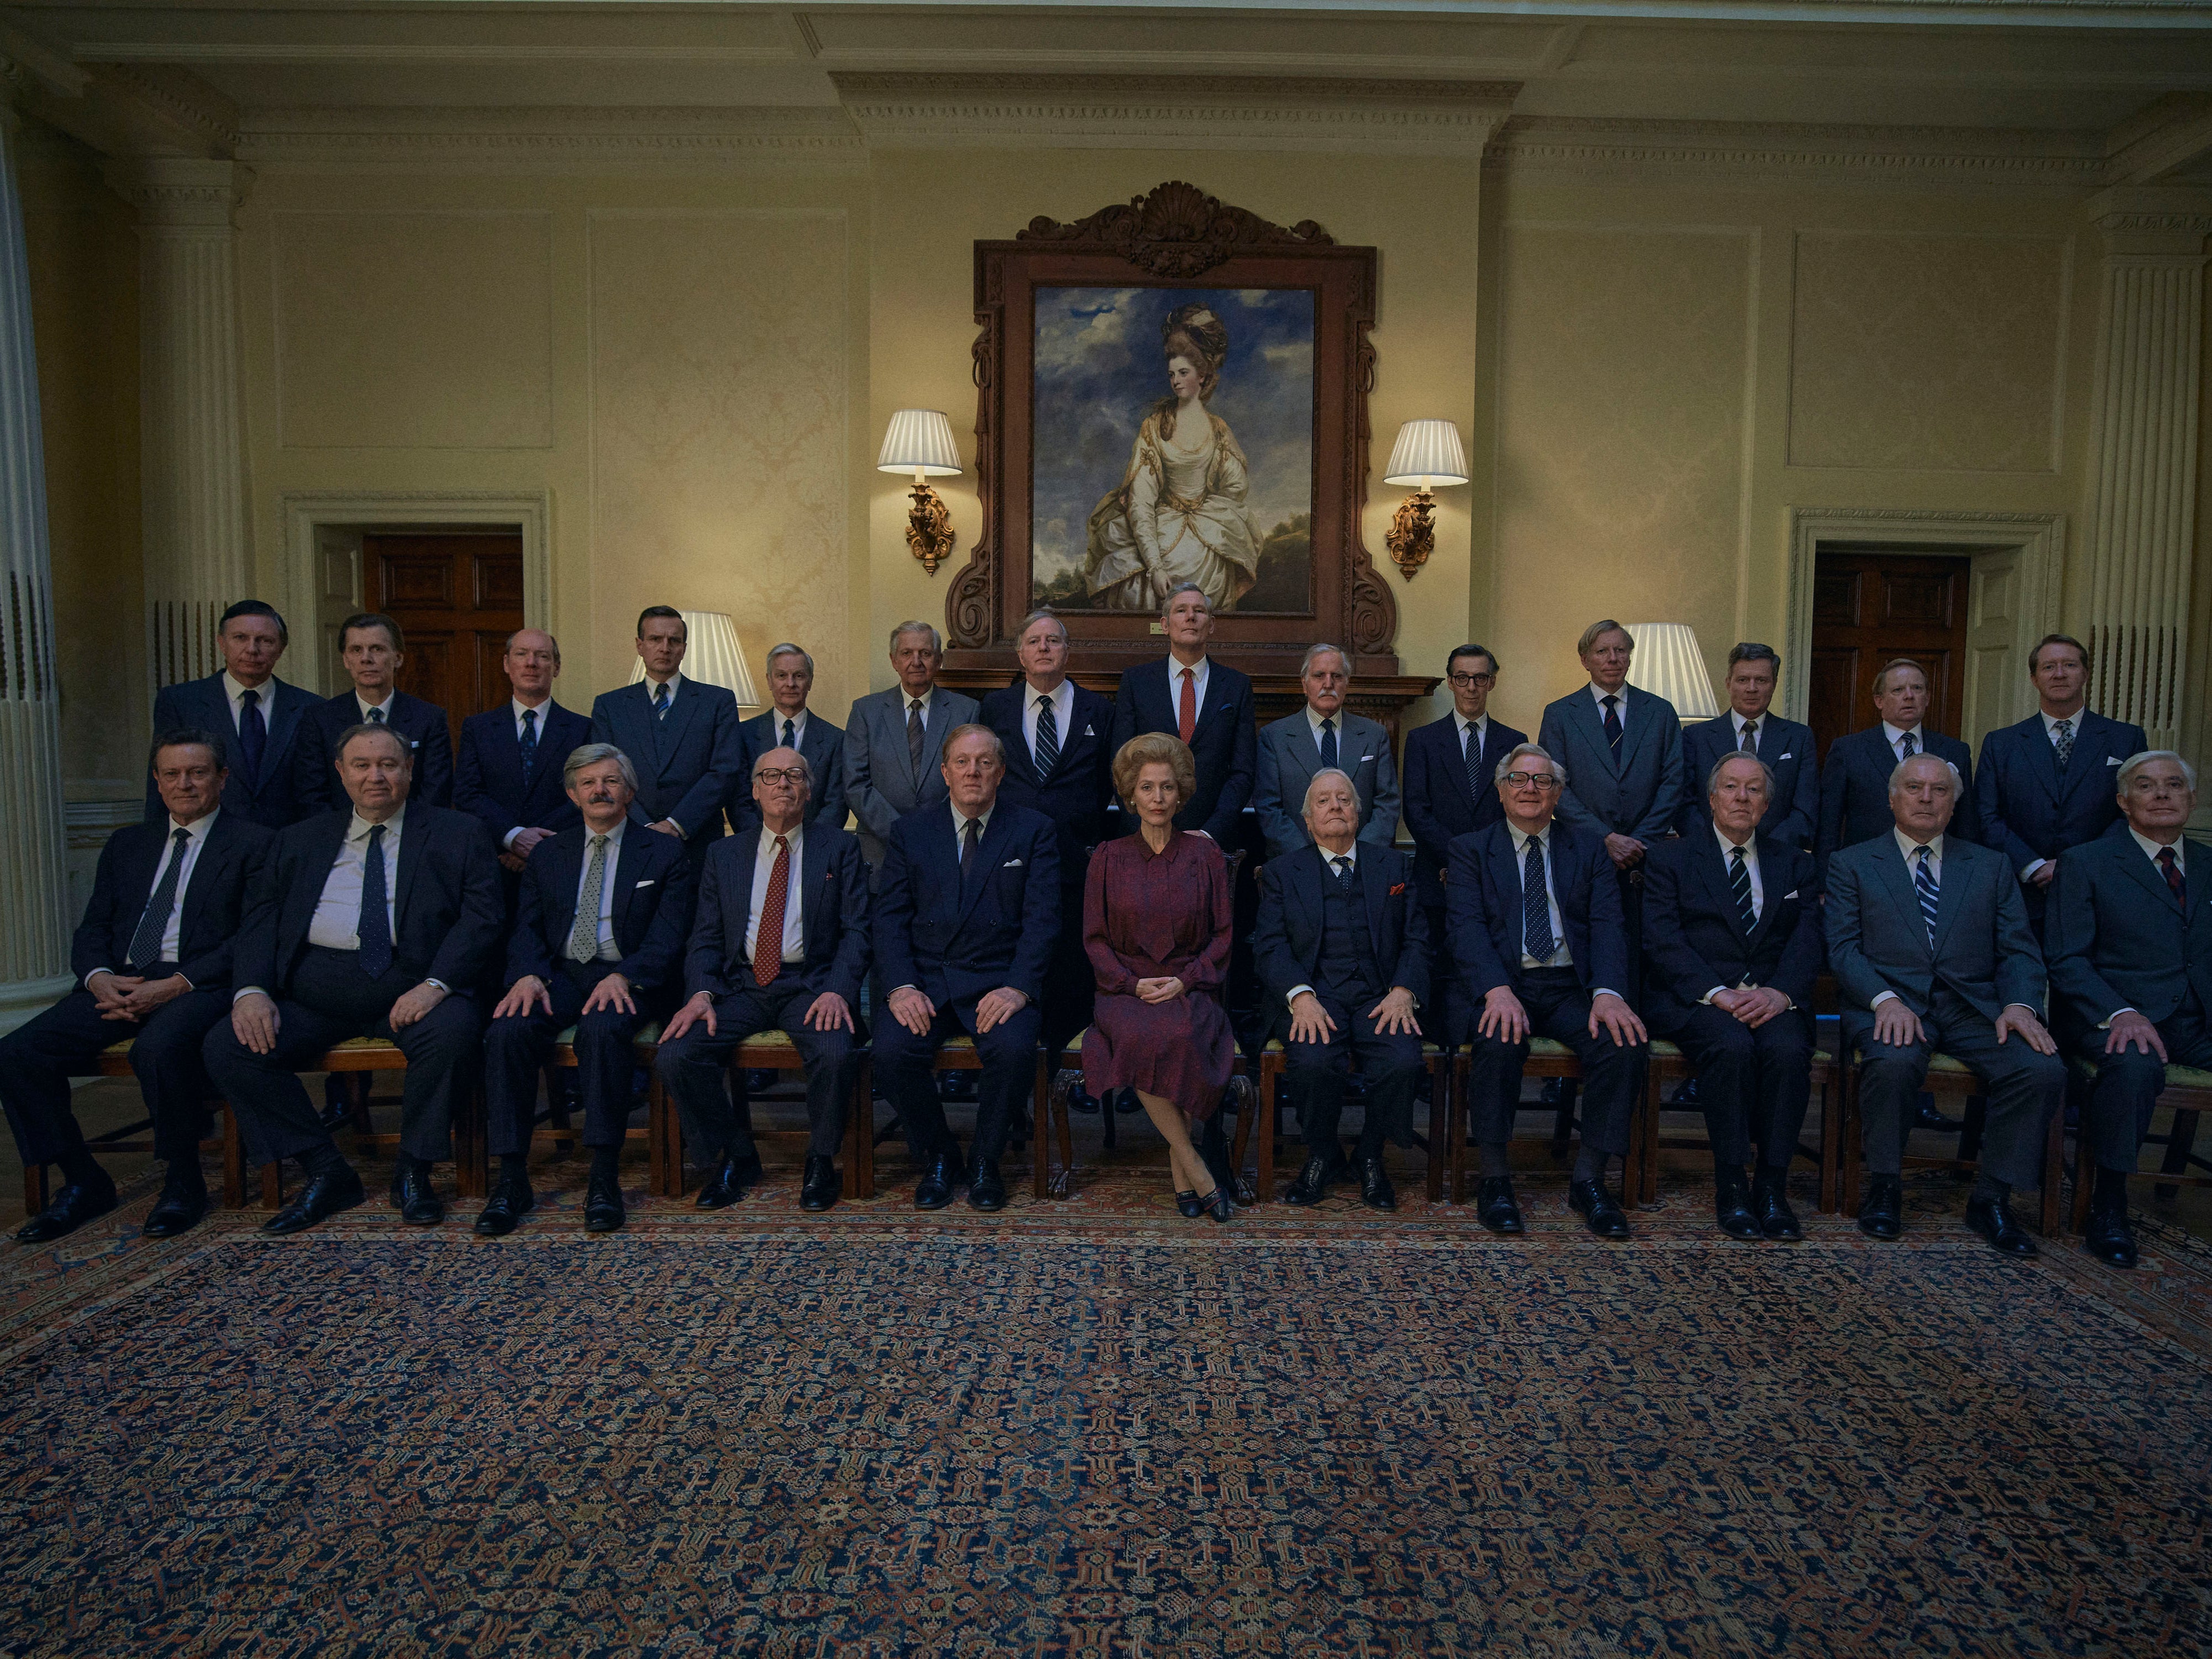 Thatcher and her cabinet at Downing Street, filmed at Hedsor House